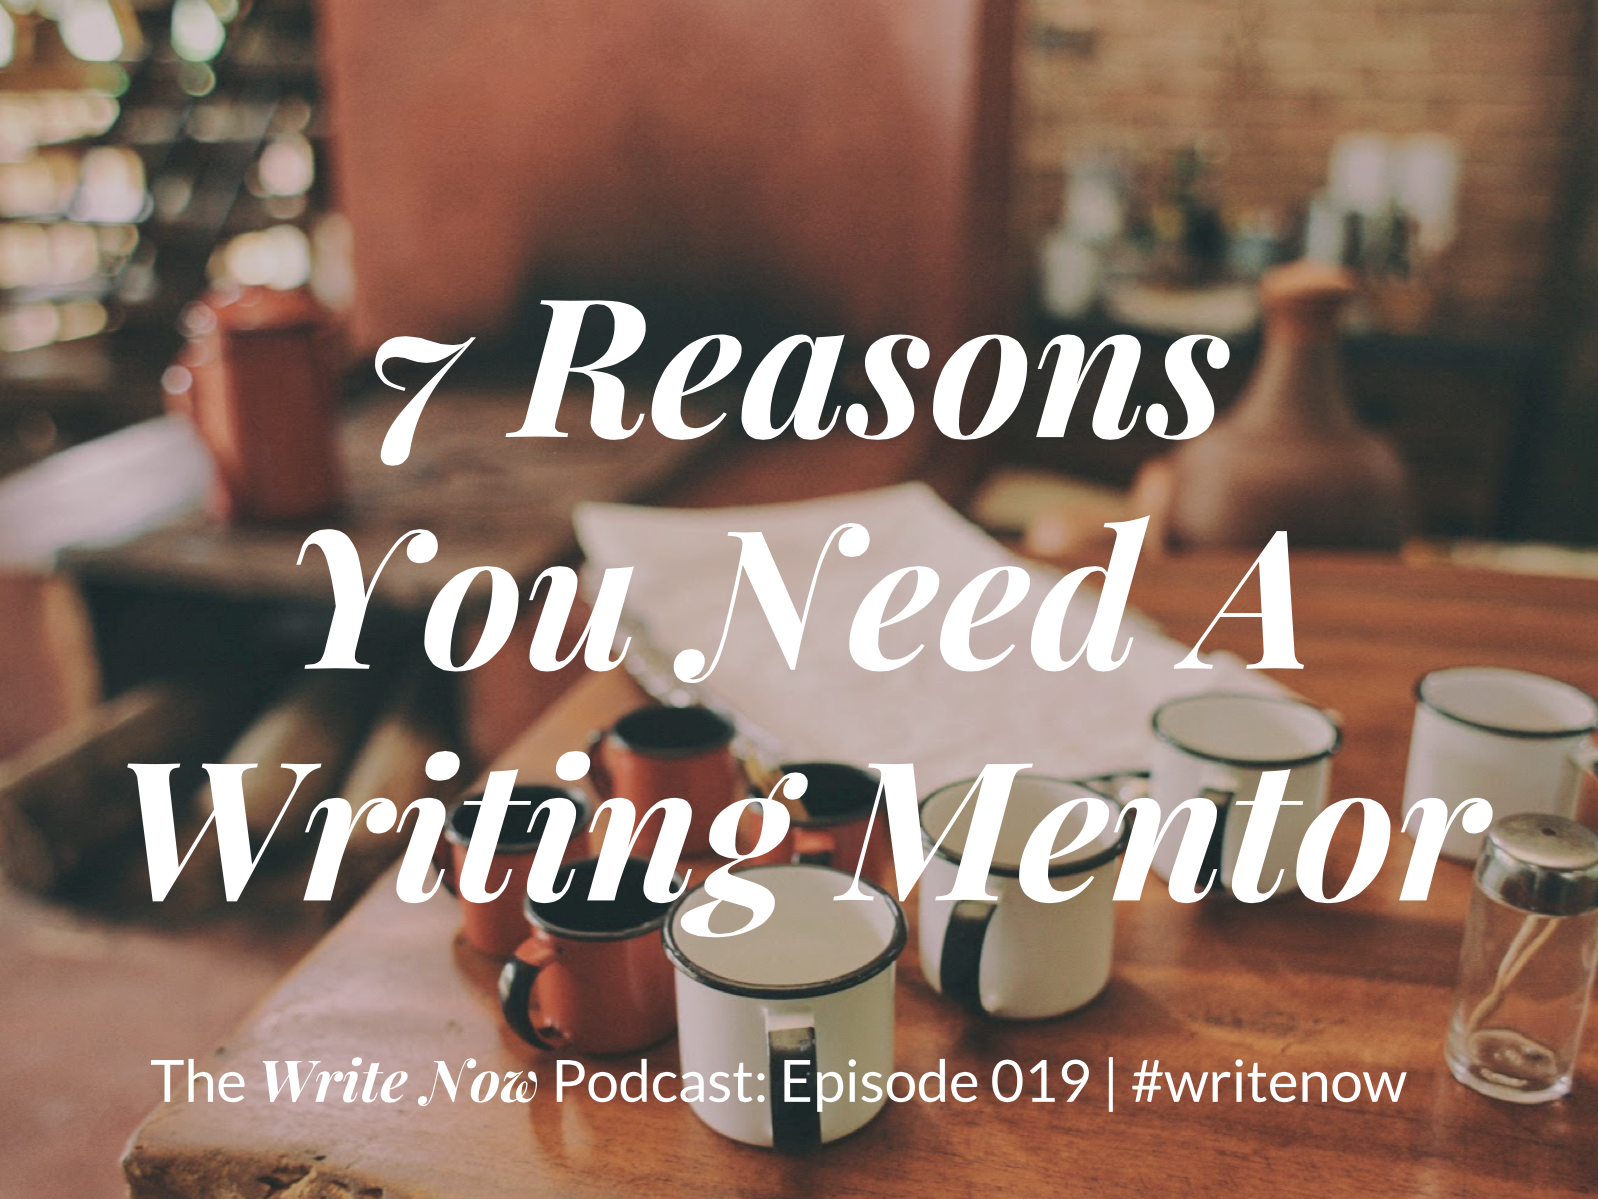 7 Reasons You Need Writing | The Write Podcast